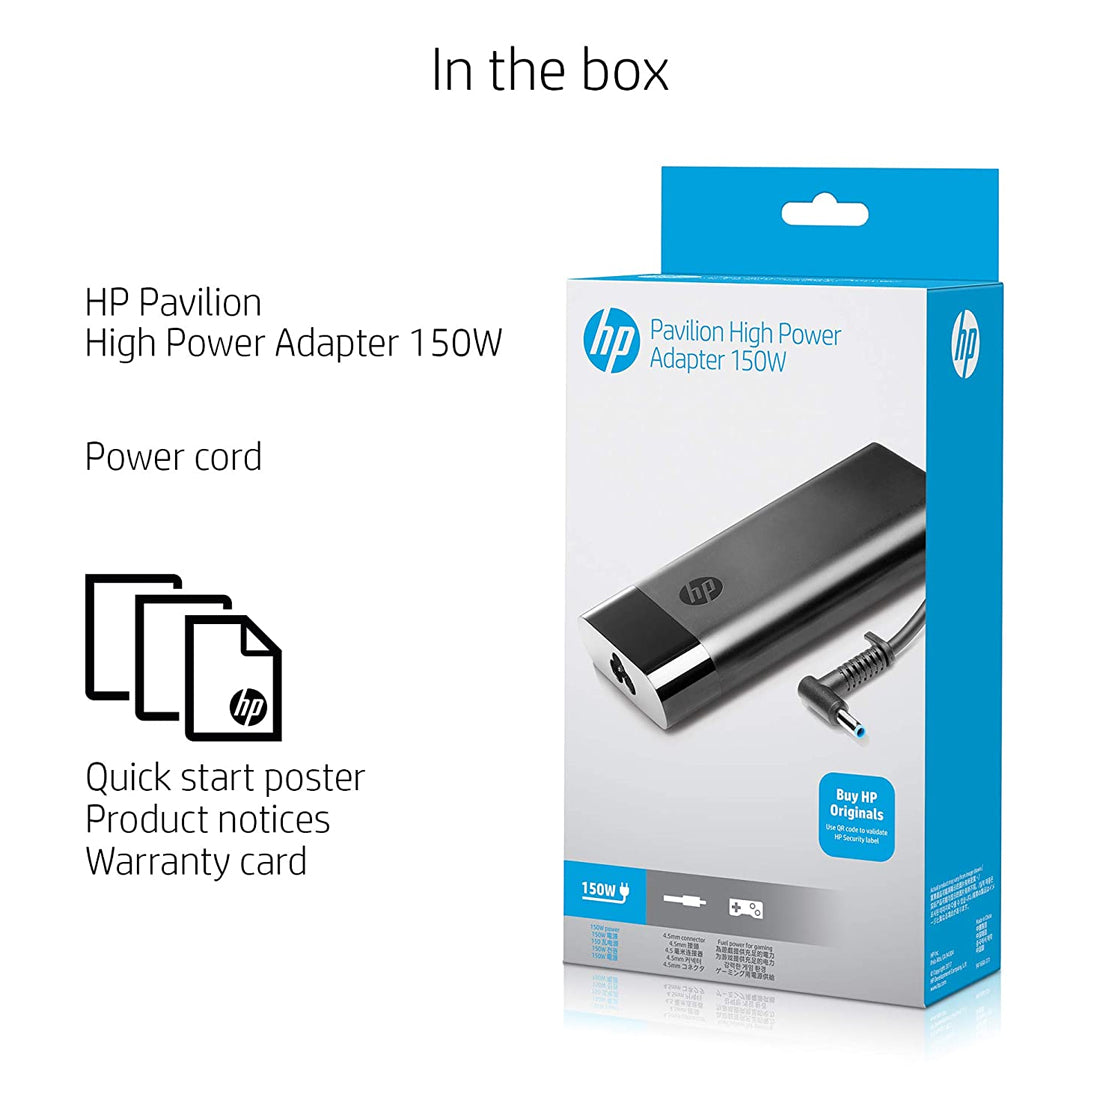 HP Original 150W 4.5mm Pin Laptop AIO Desktop Charger Adapter without Power Cord